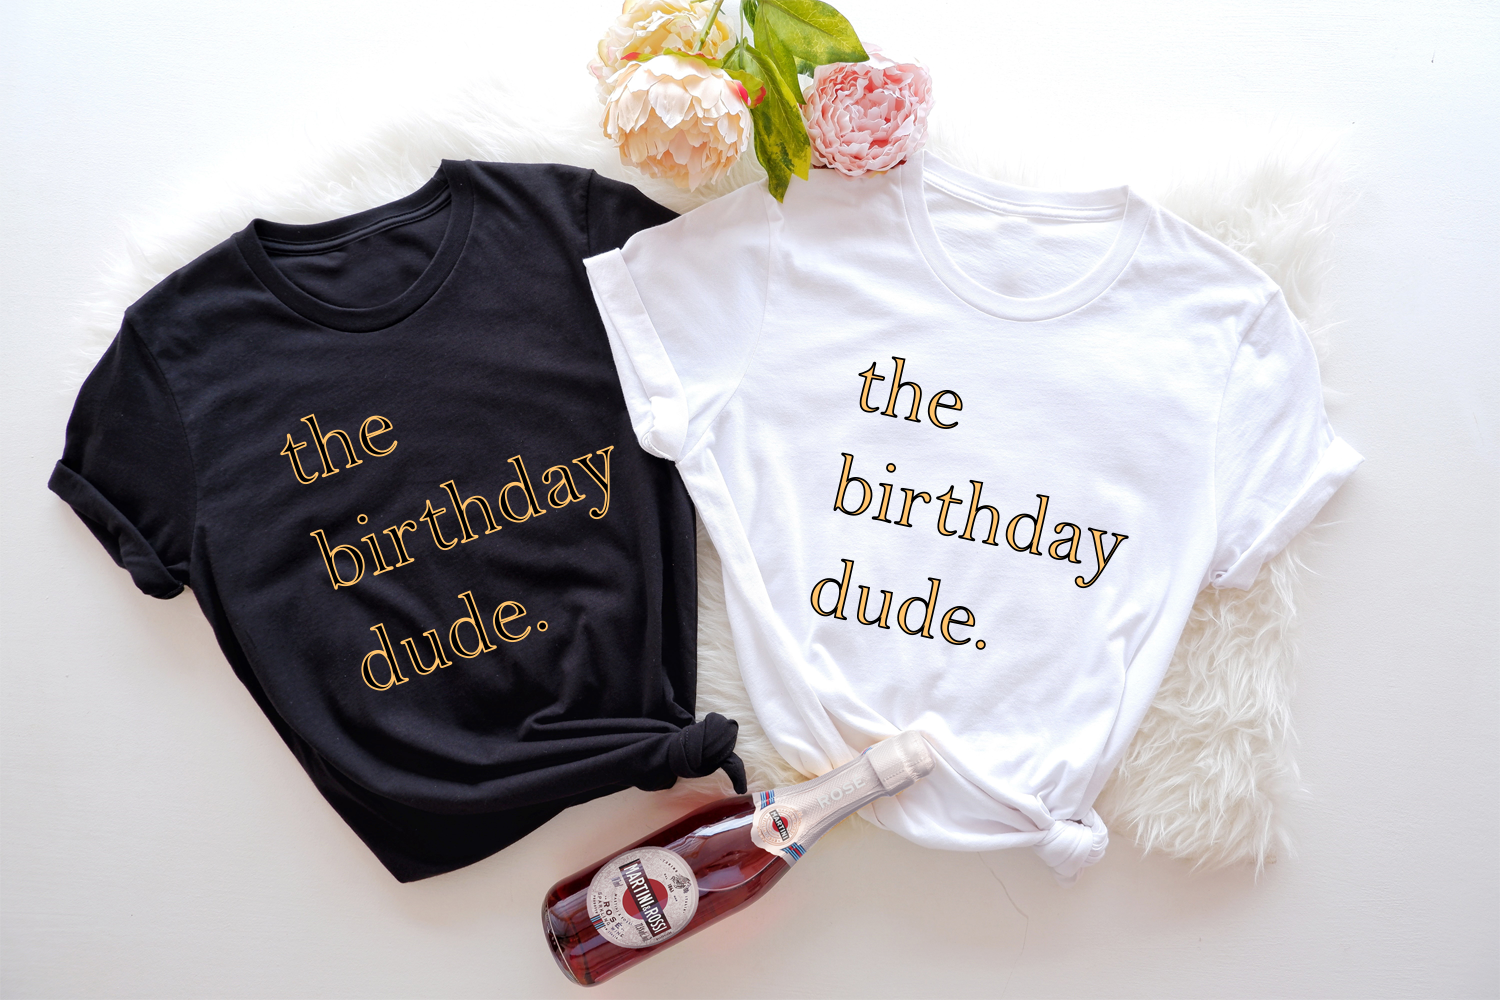 Celebrate your little dude's special day with this retro-inspired "The Birthday Dude" Kids TShirt.